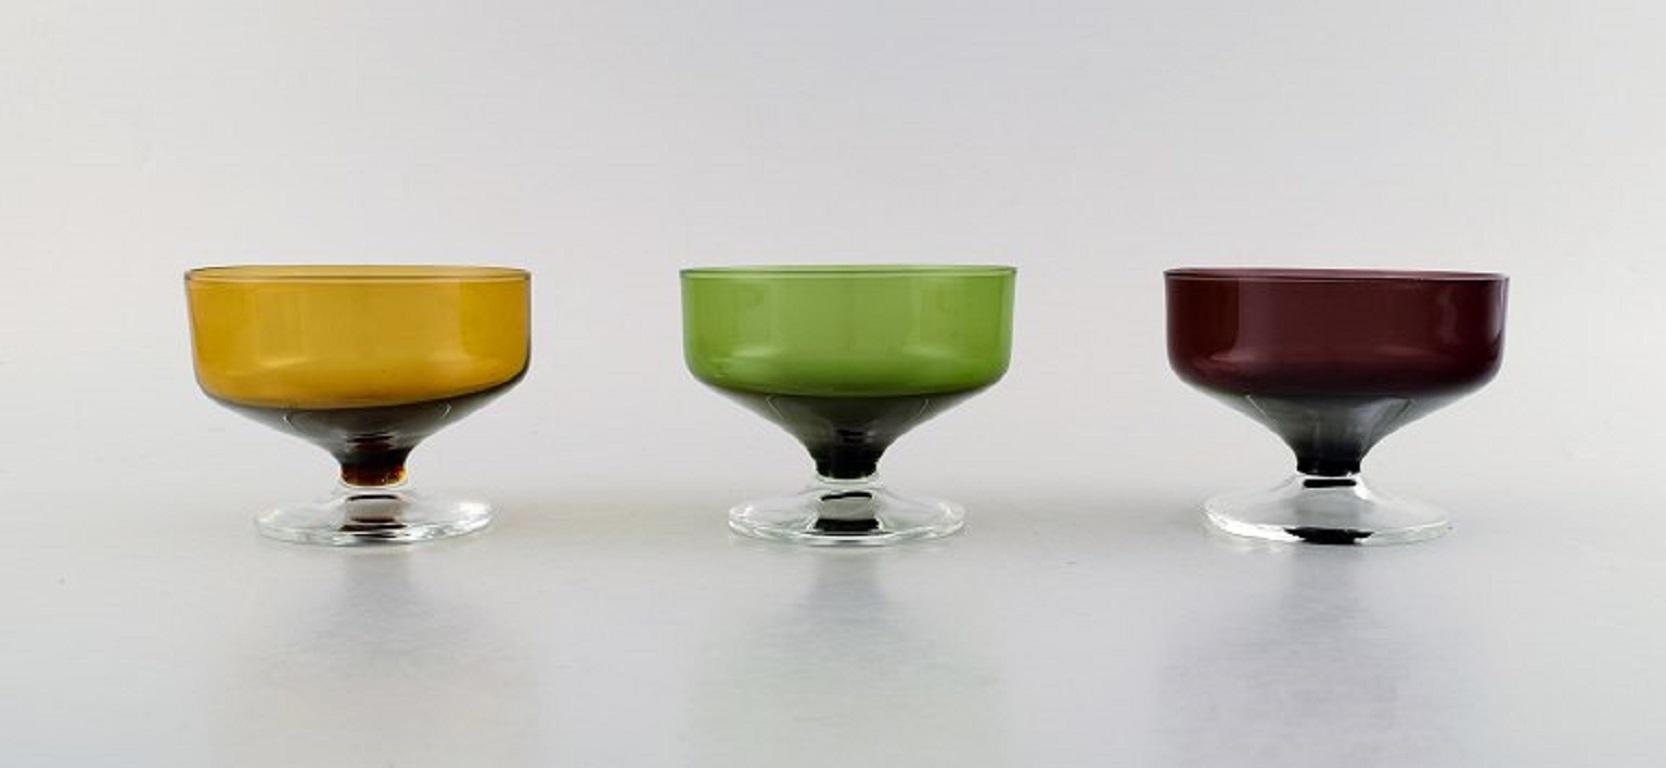 Åseda Glassworks, Sweden. 
Set of six cocktail glasses / dessert bowls in mouth-blown art glass. 1960's.
In very good condition.
Sticker.
Measures: 9.8 x 7.5 cm.